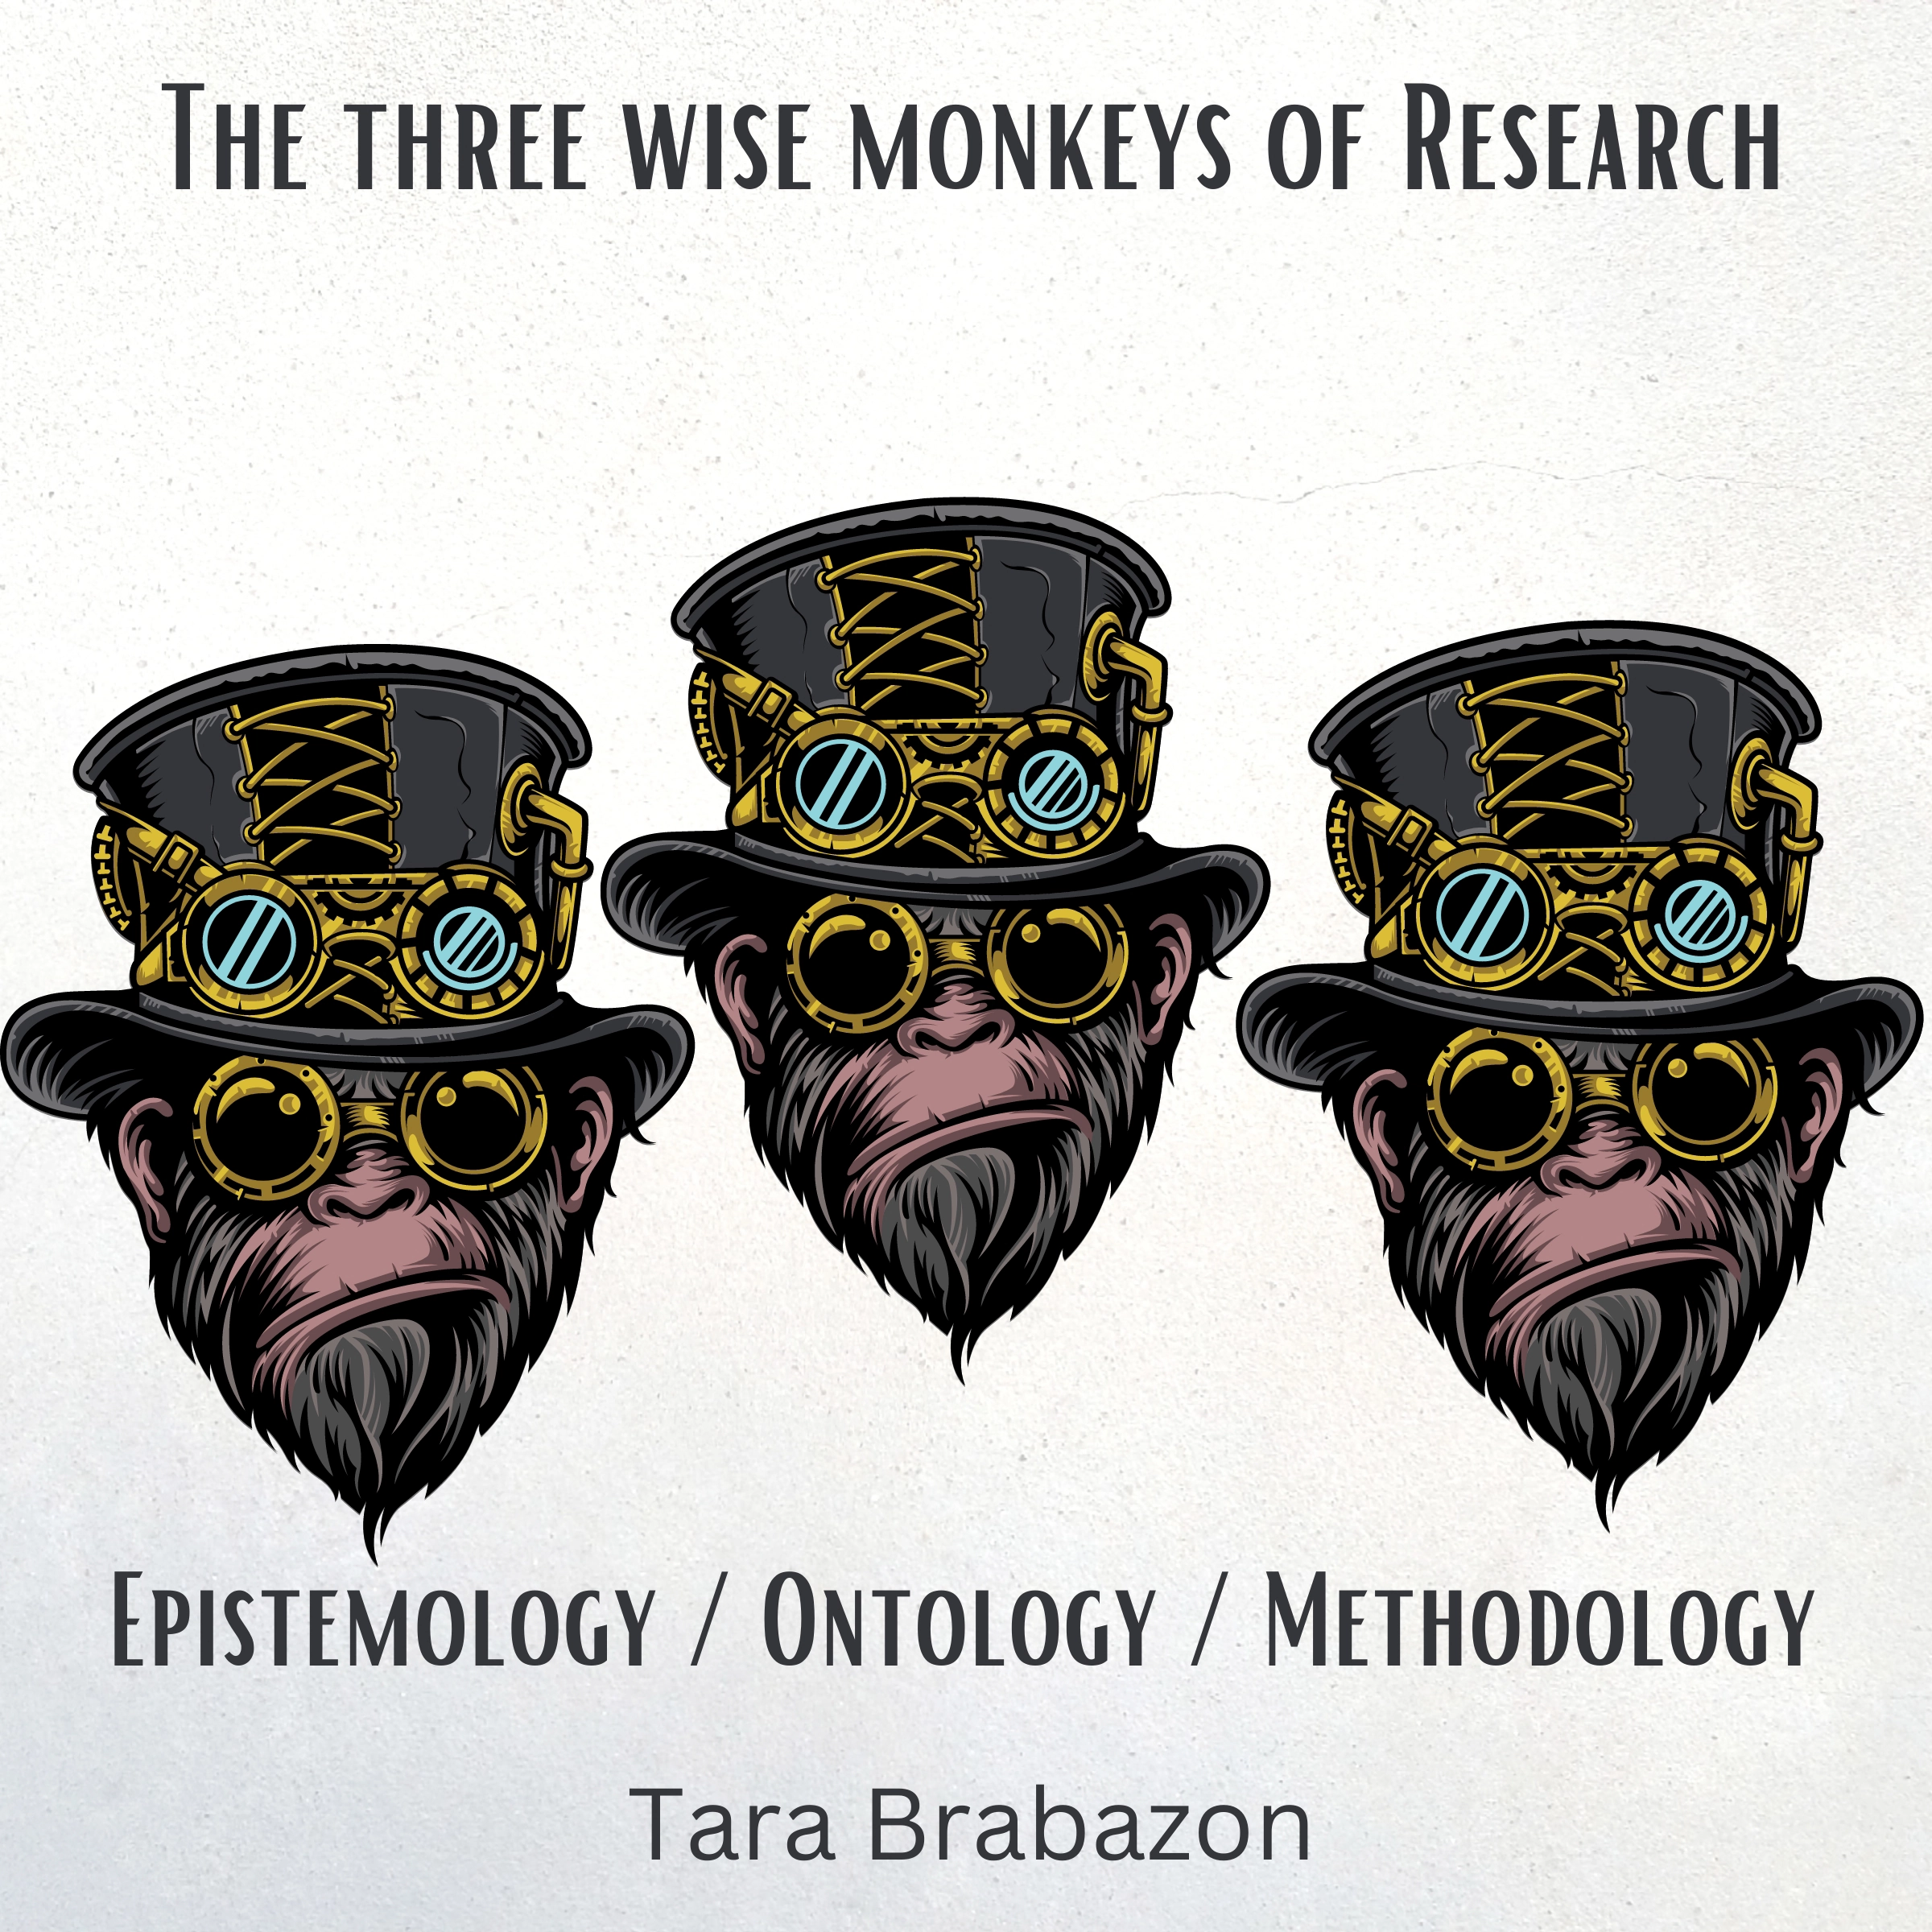 The Three Wise Monkeys of Research Audiobook by Tara Brabazon